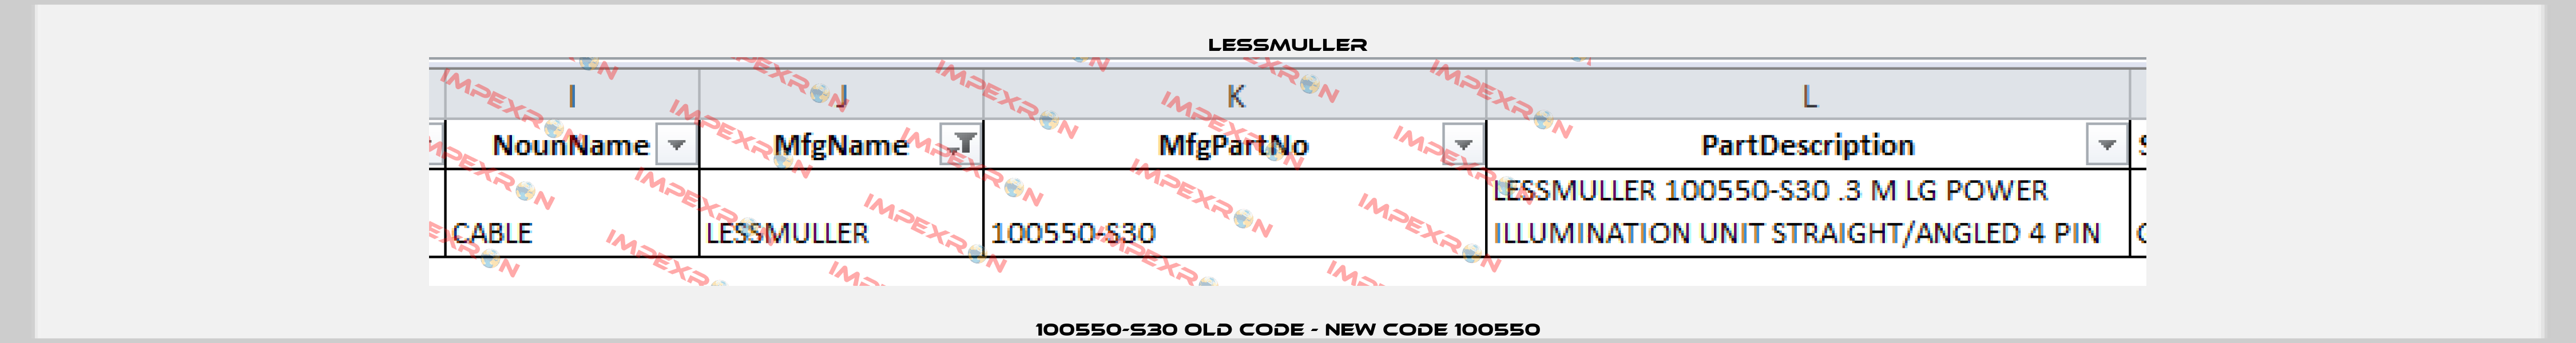 100550-S30 old code - new code 100550 LESSMULLER